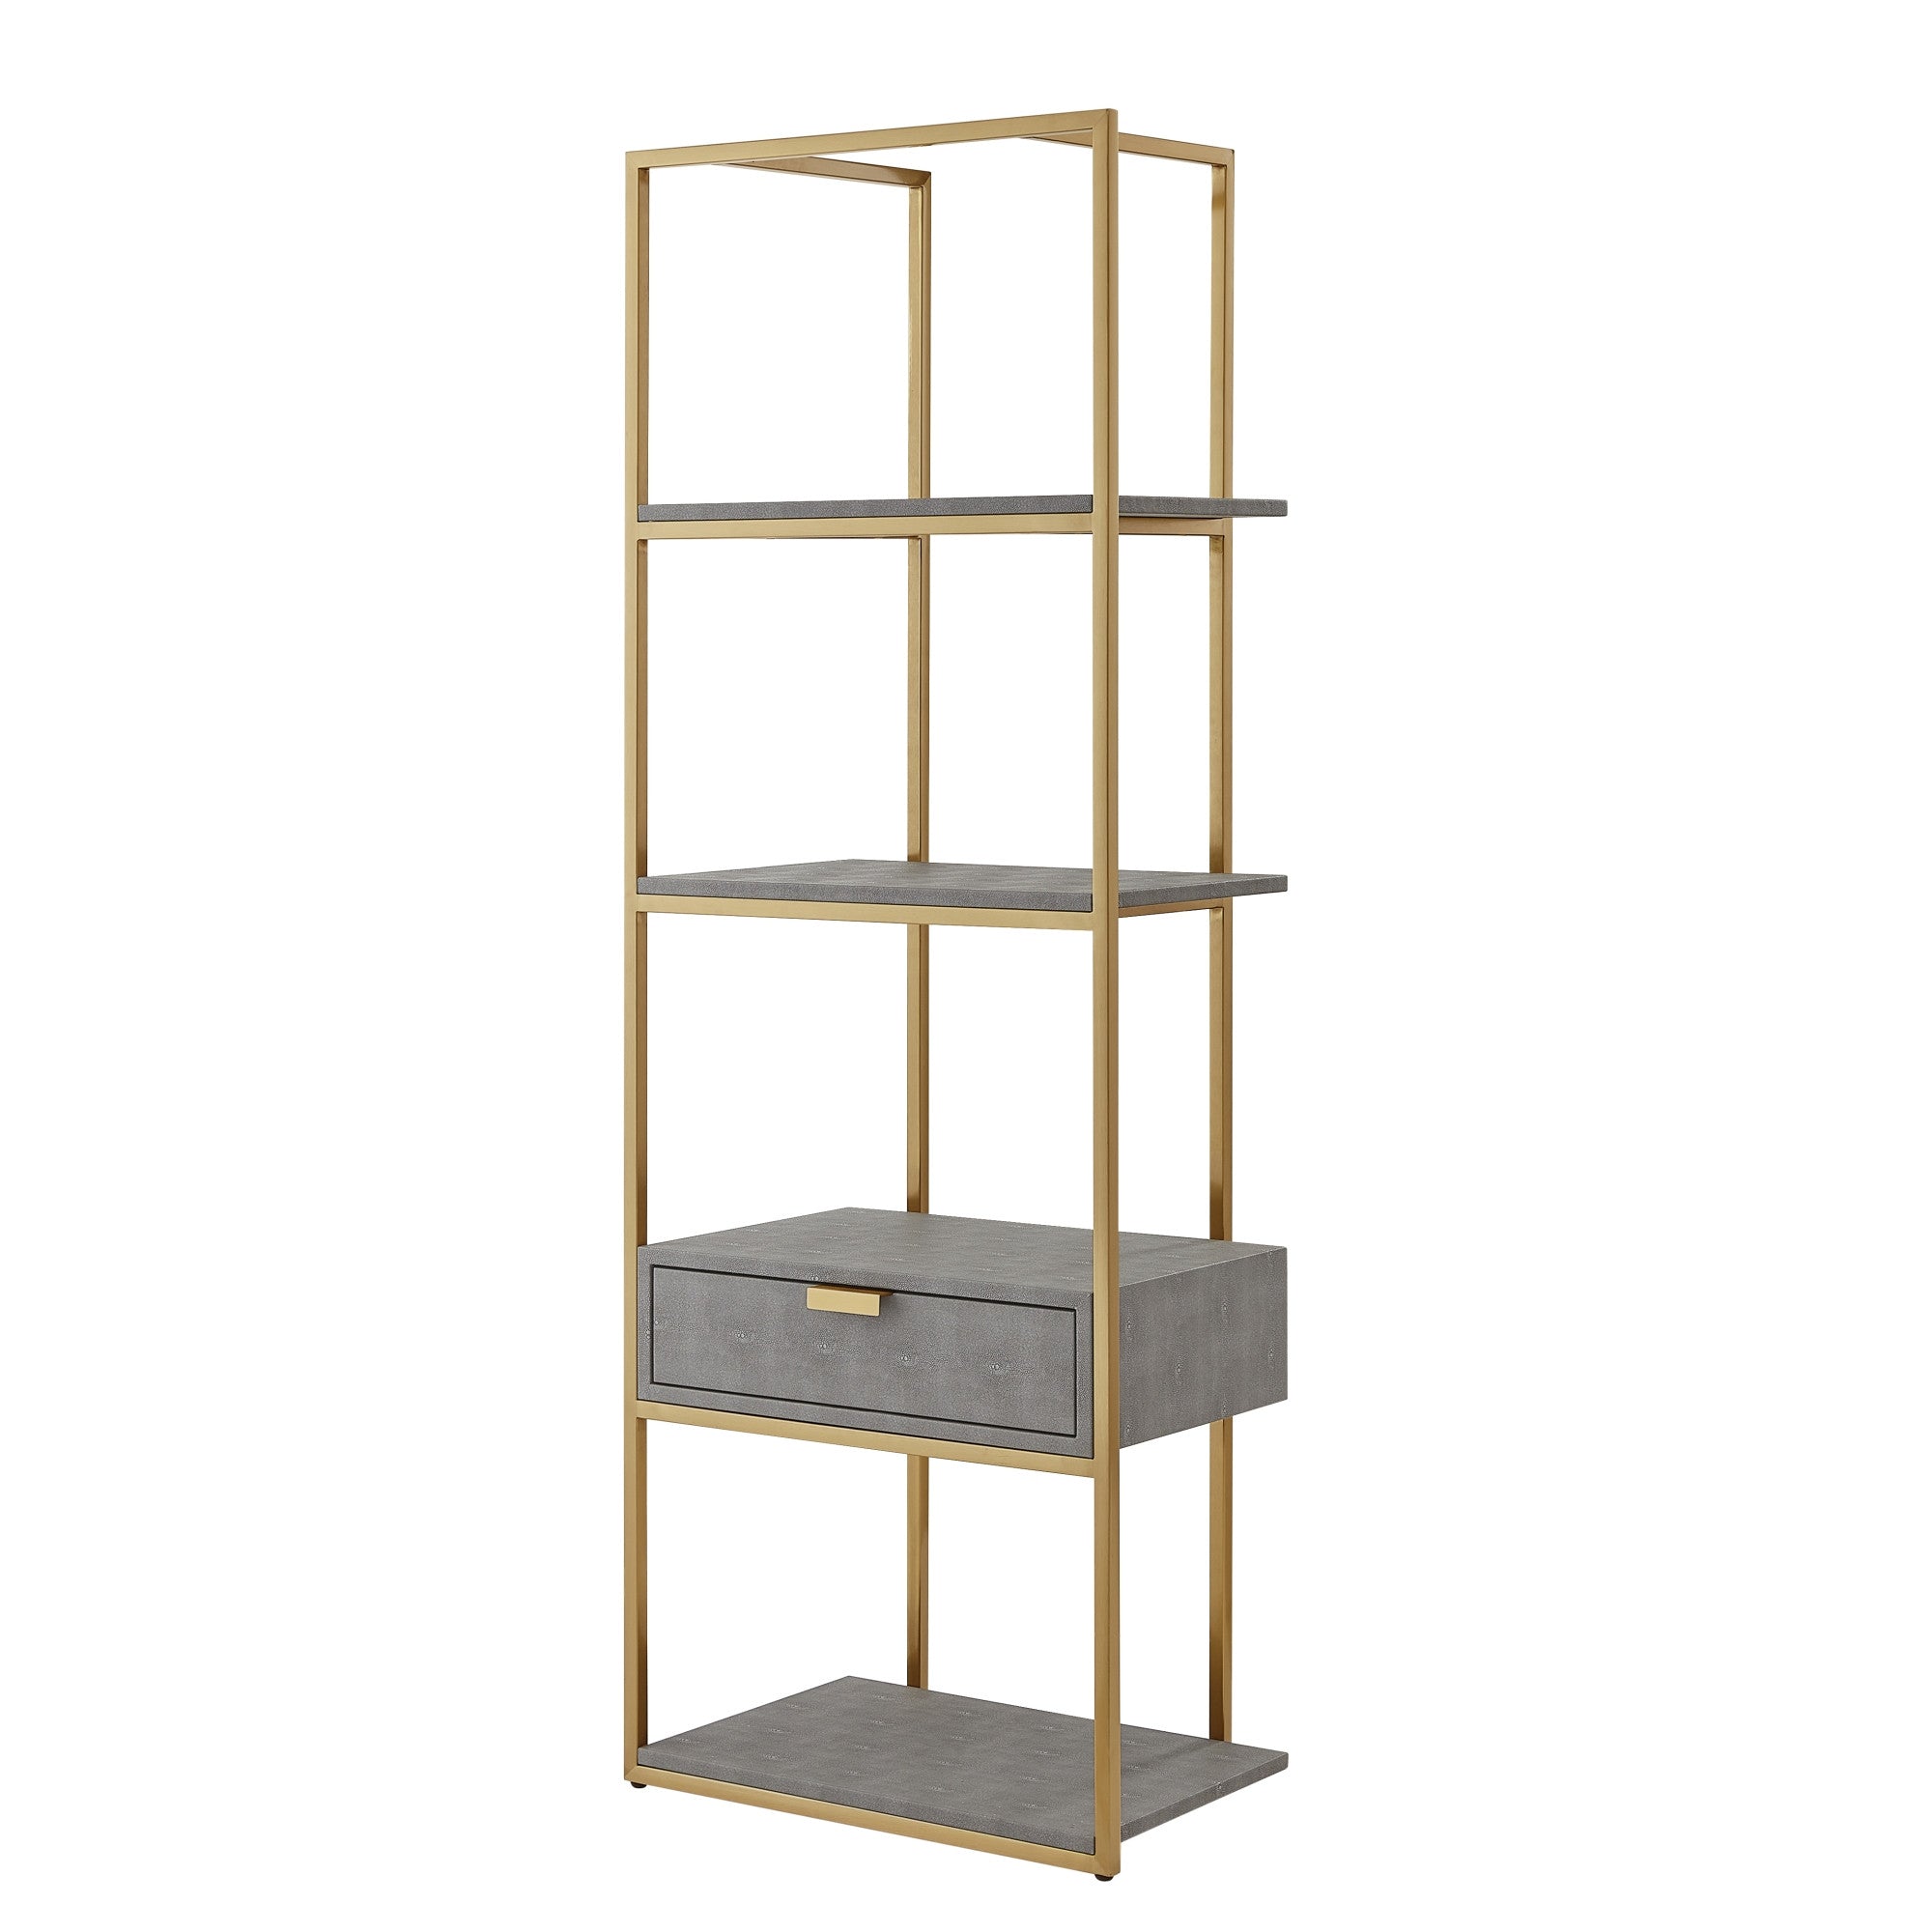 68" Gray Stainless Steel Four Tier Etagere Bookcase with a drawer